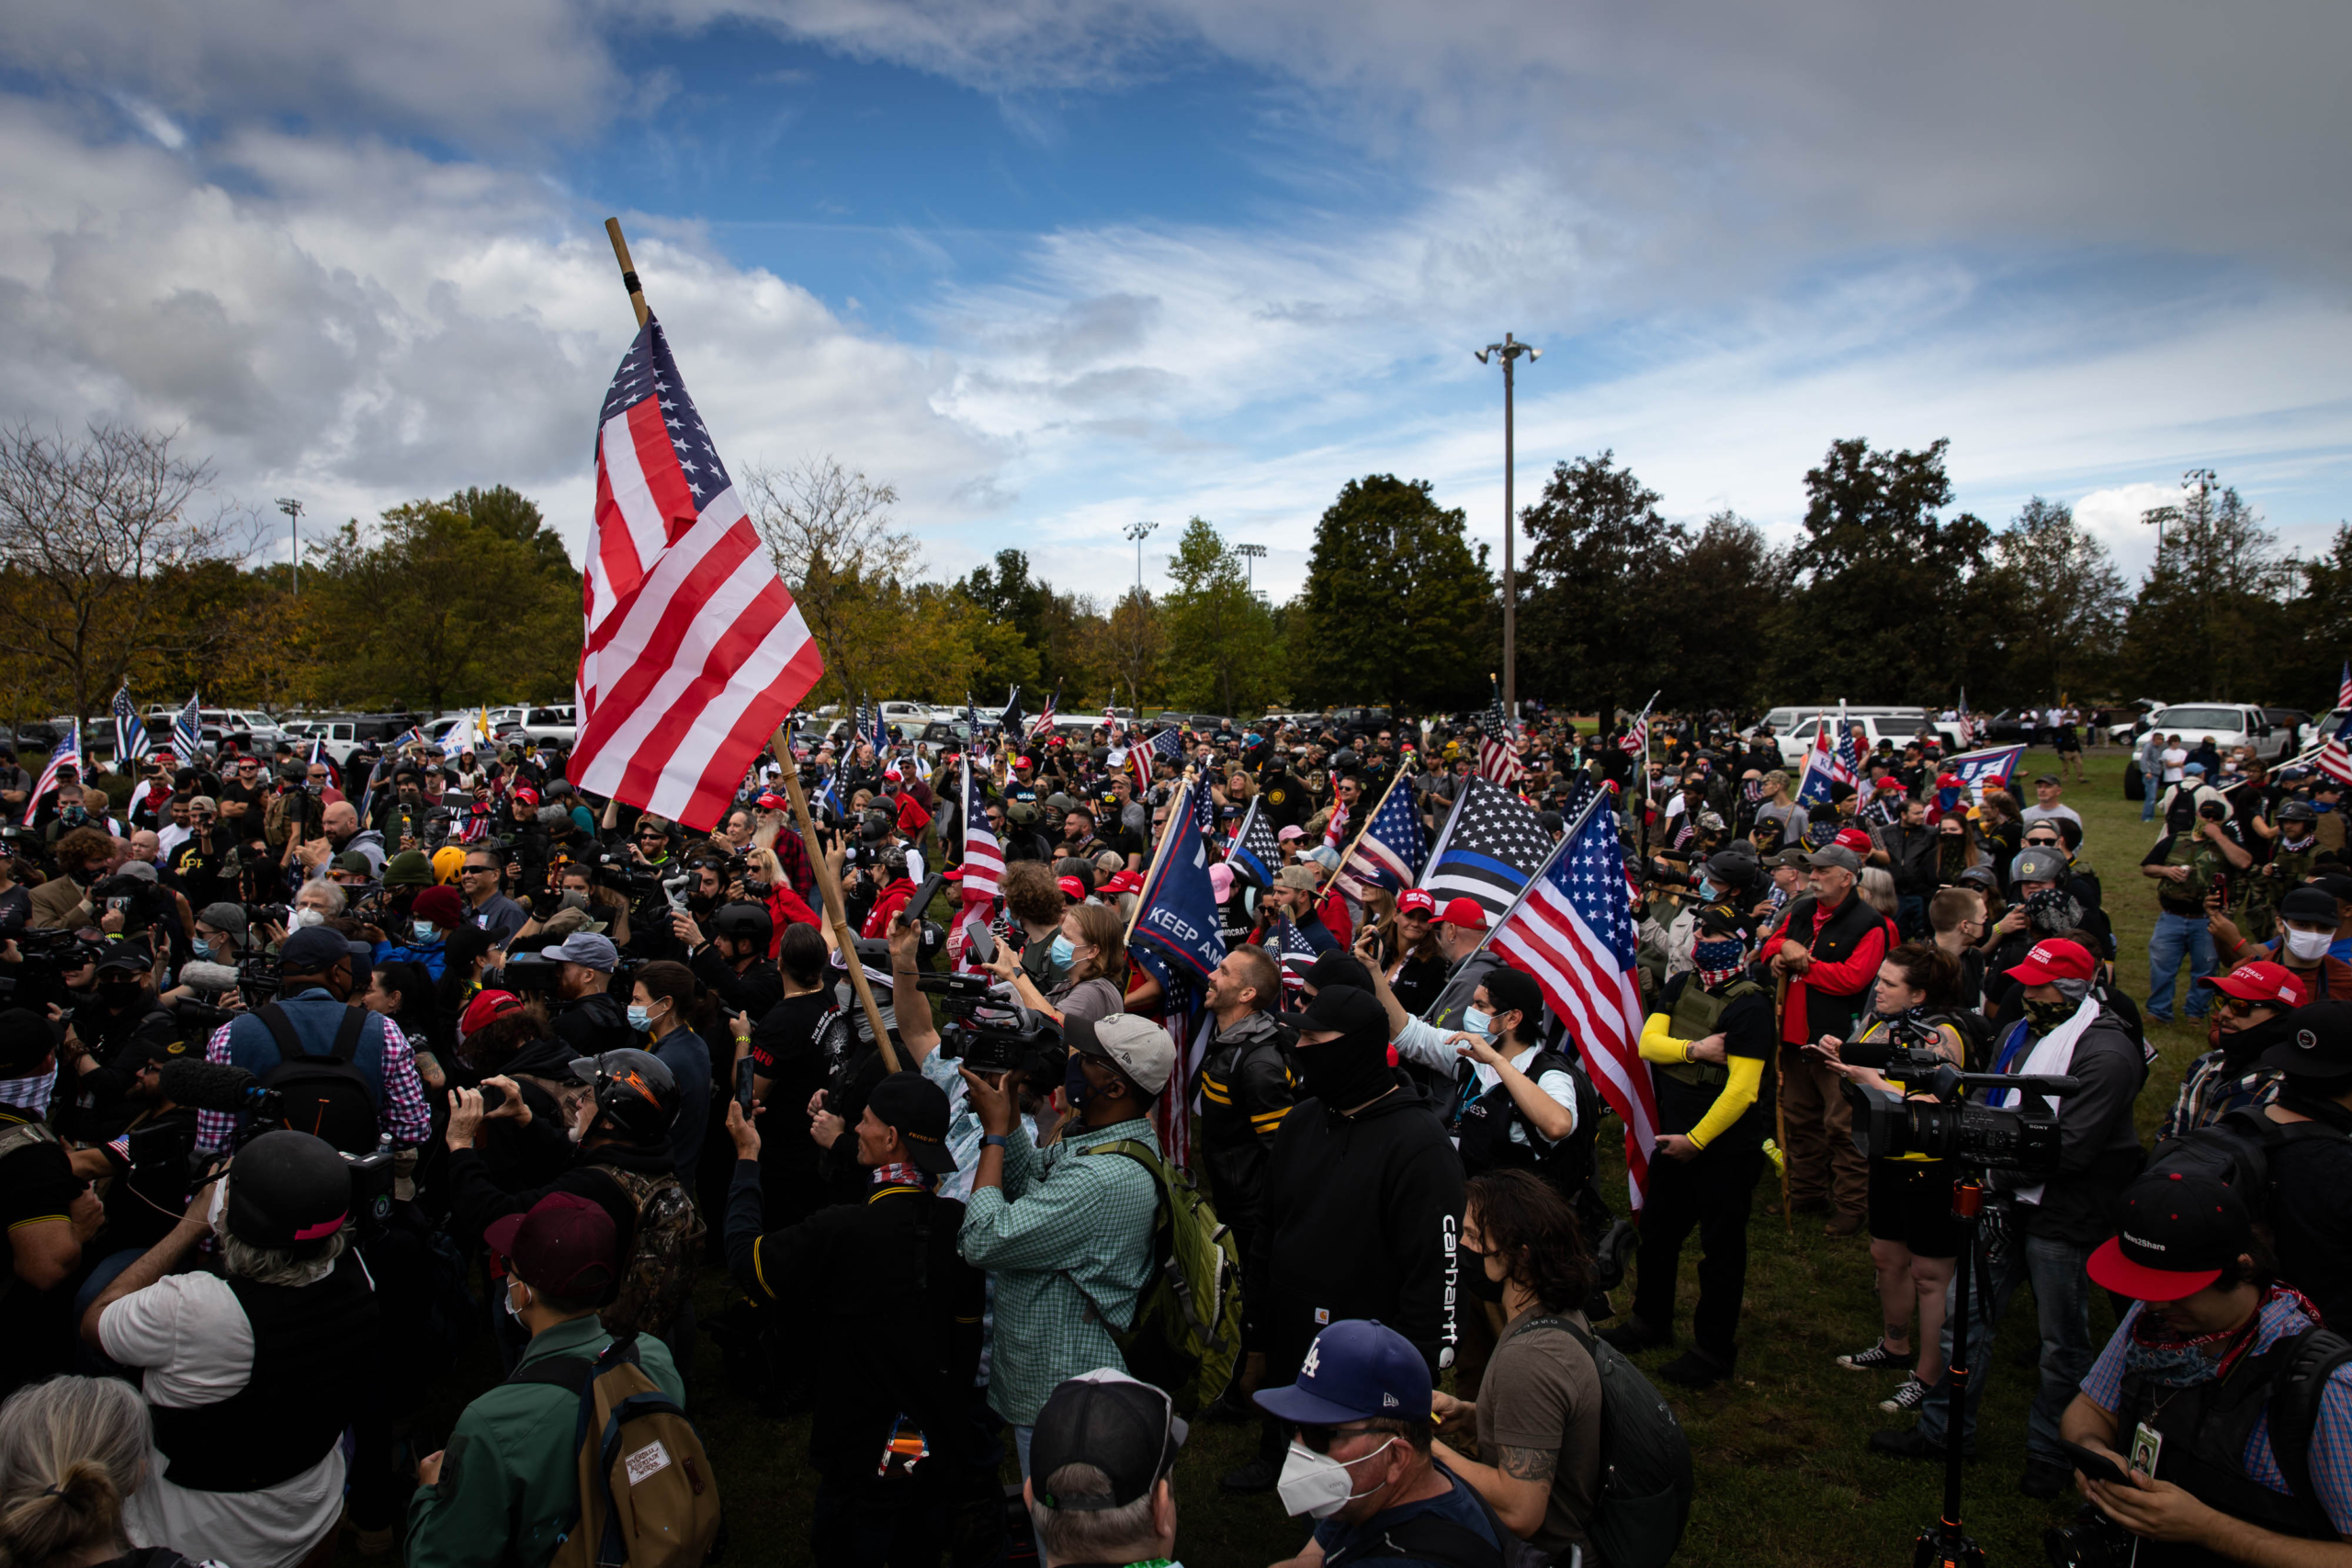 Portland Proud Boys Rally, Counter-Demonstration Largely Peaceful: Police